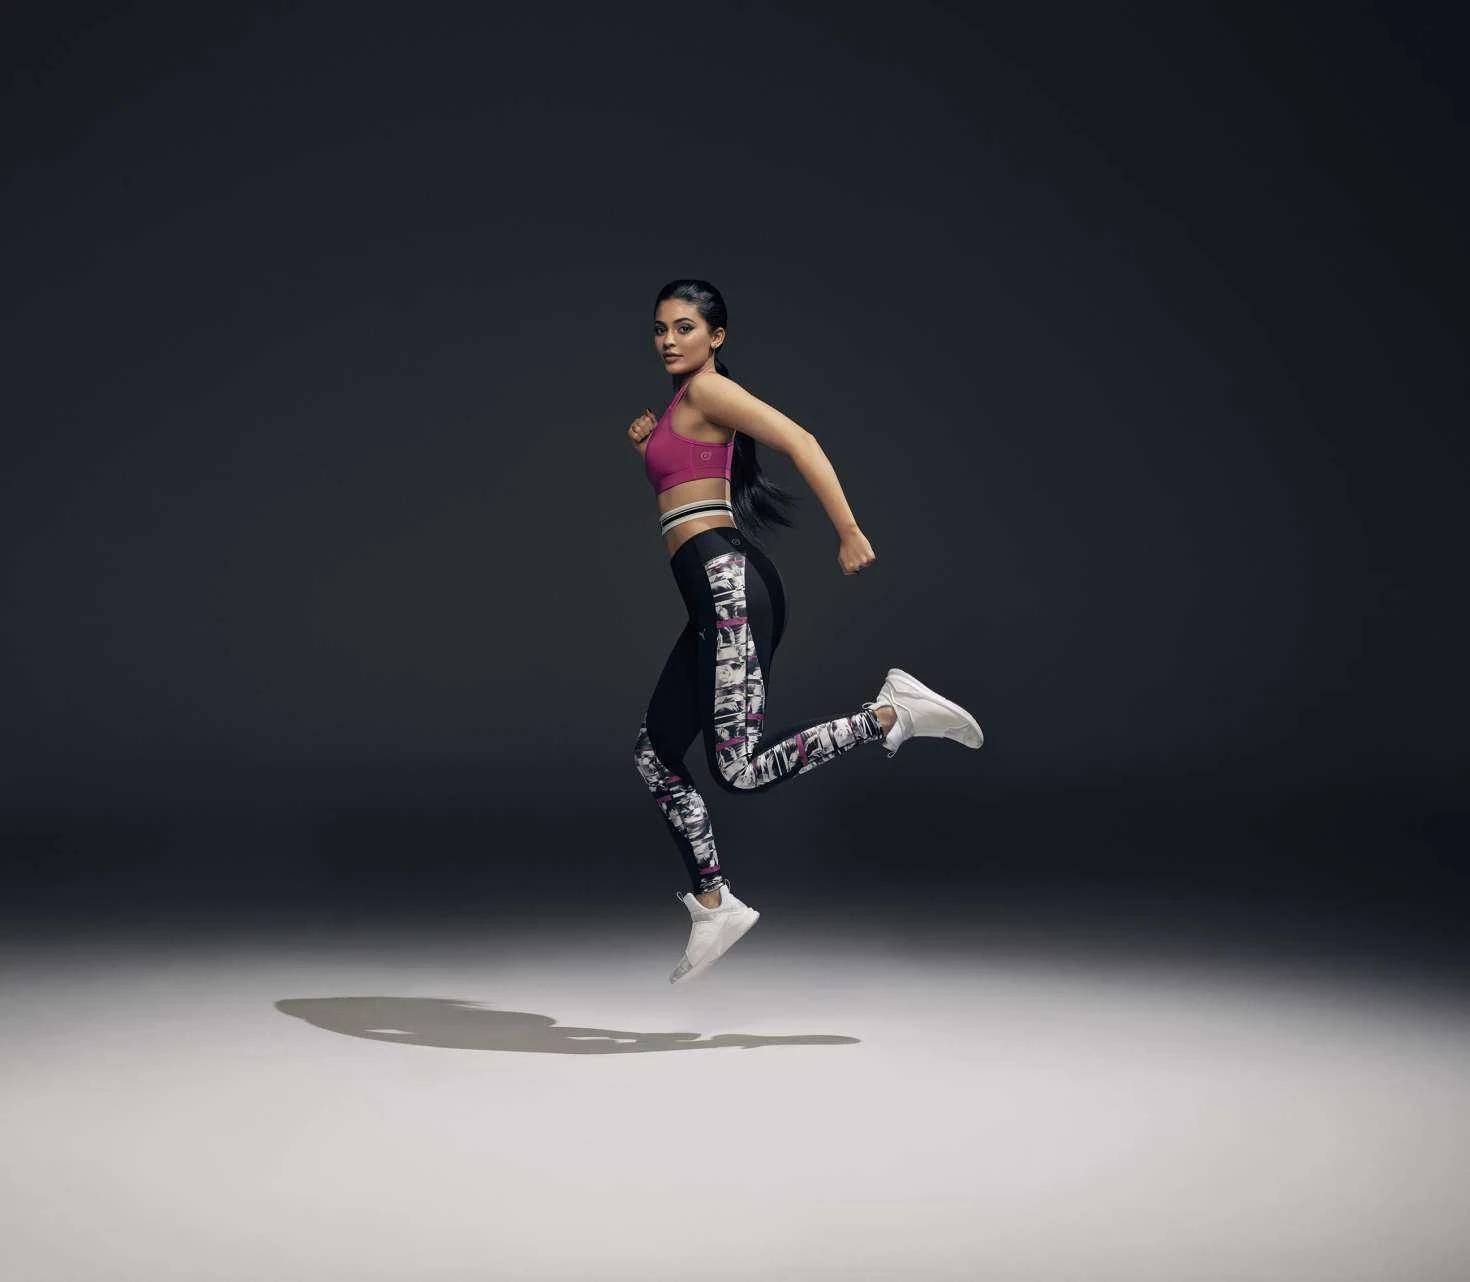 Kylie Jenner flaunts incredible physique for Puma's Spring/Summer 2017 Campaign